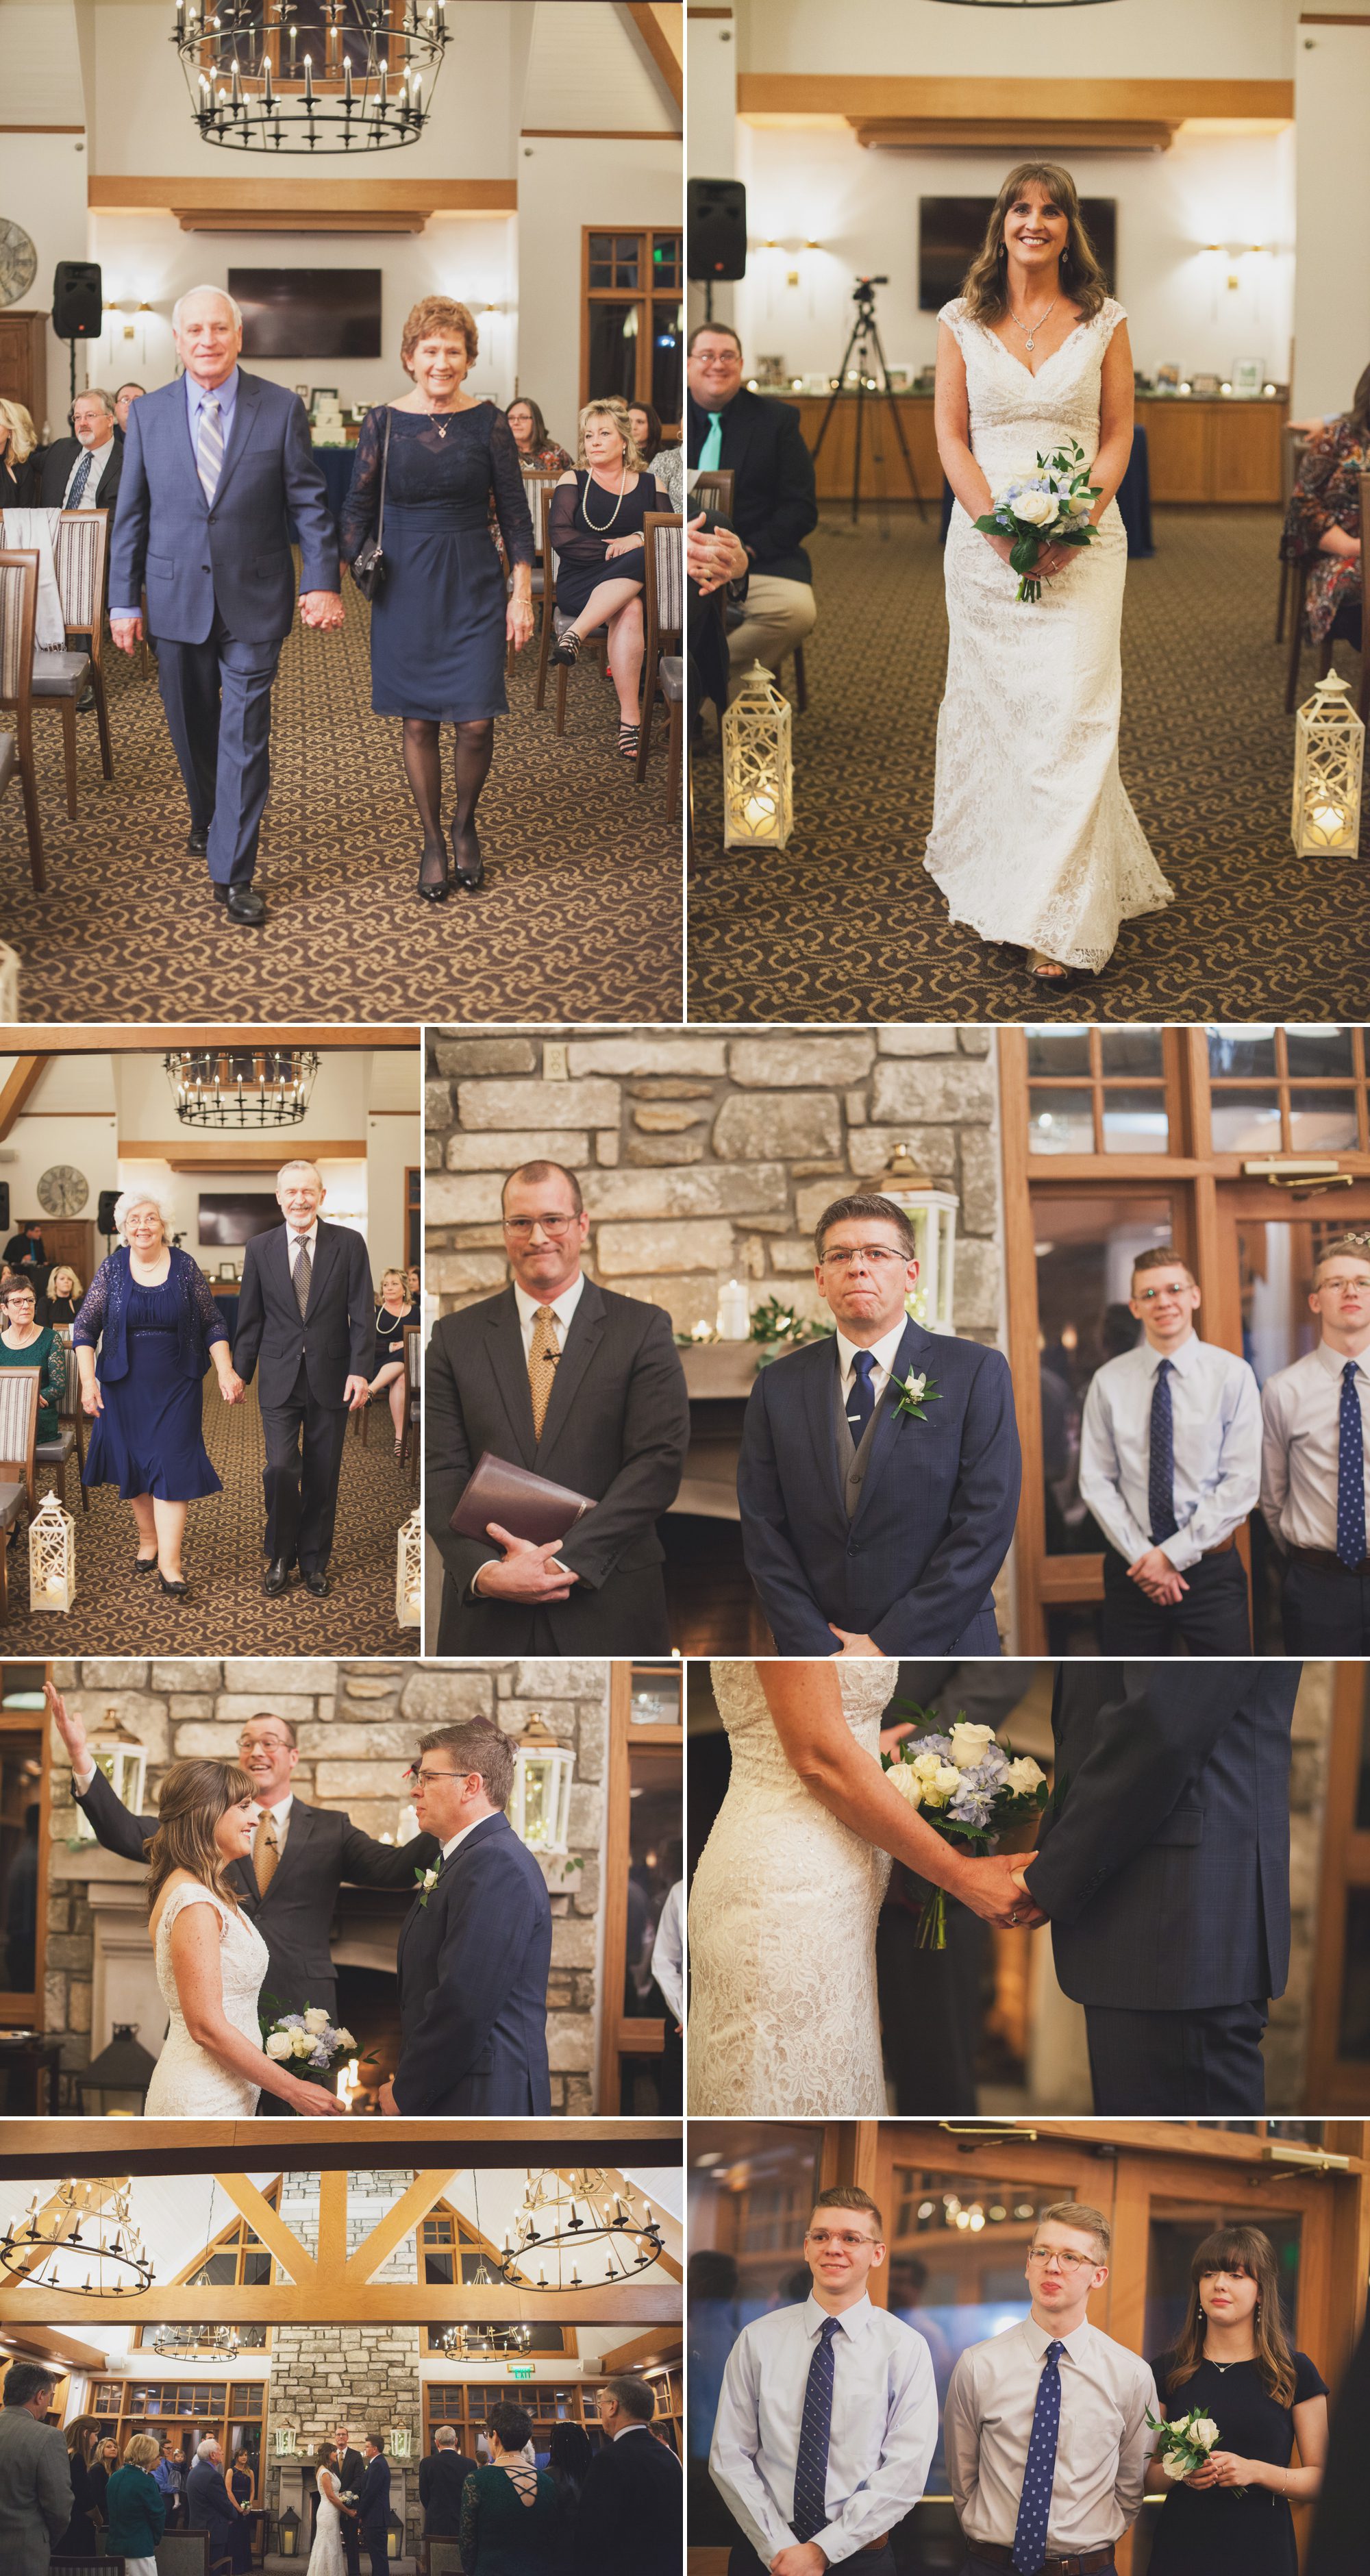 Wedding ceremony, processional into wedding at clubhouse. Winter wedding at Vanderbilt Legends Golf Course in Brentwood TN, photos by Krista Lee Photography